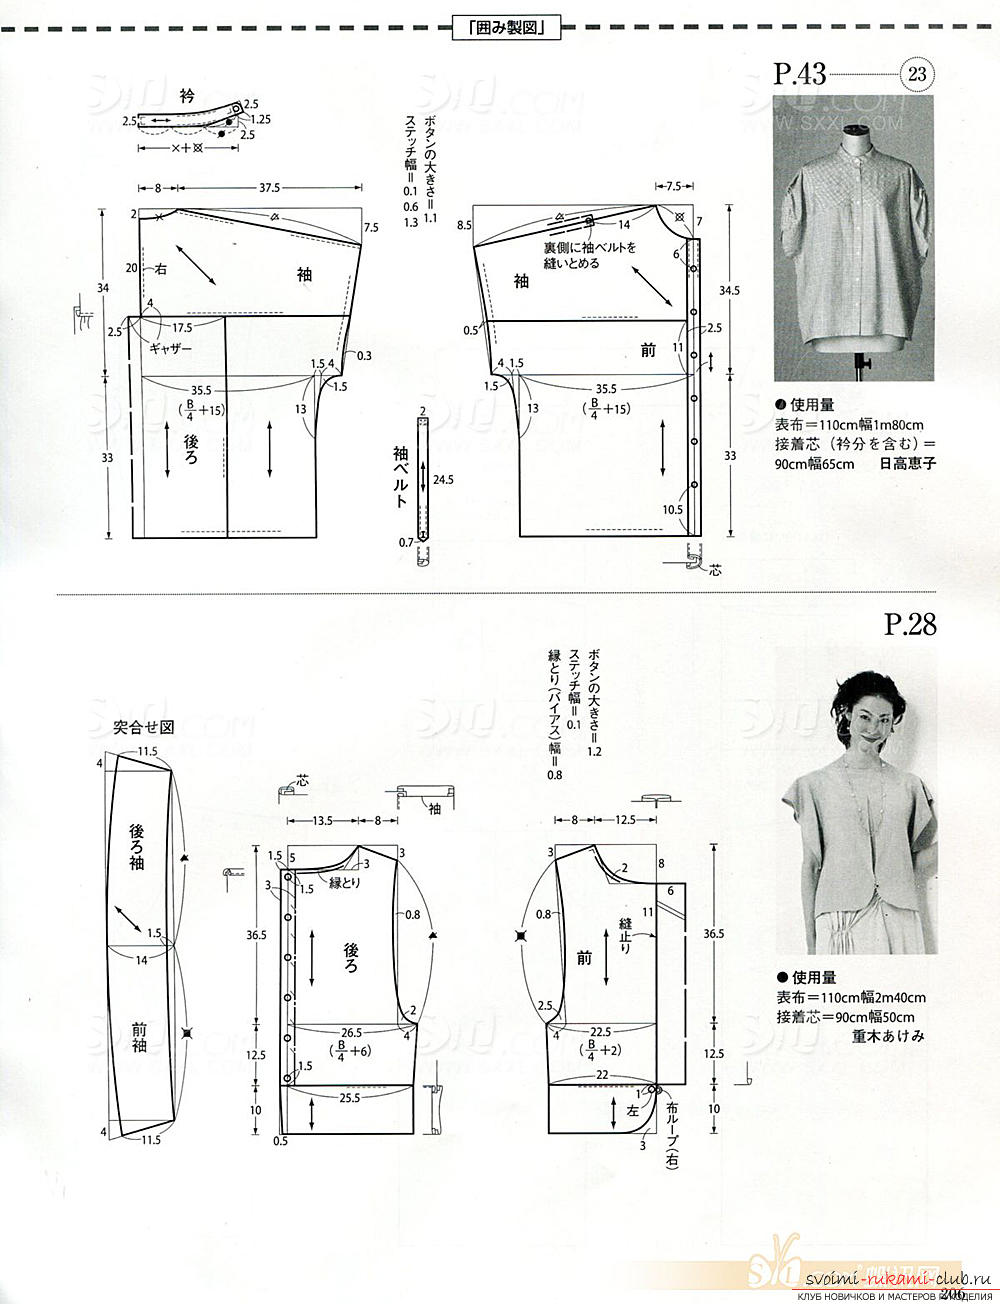 Photos of patterns of women's clothing patterns. Photo number 16